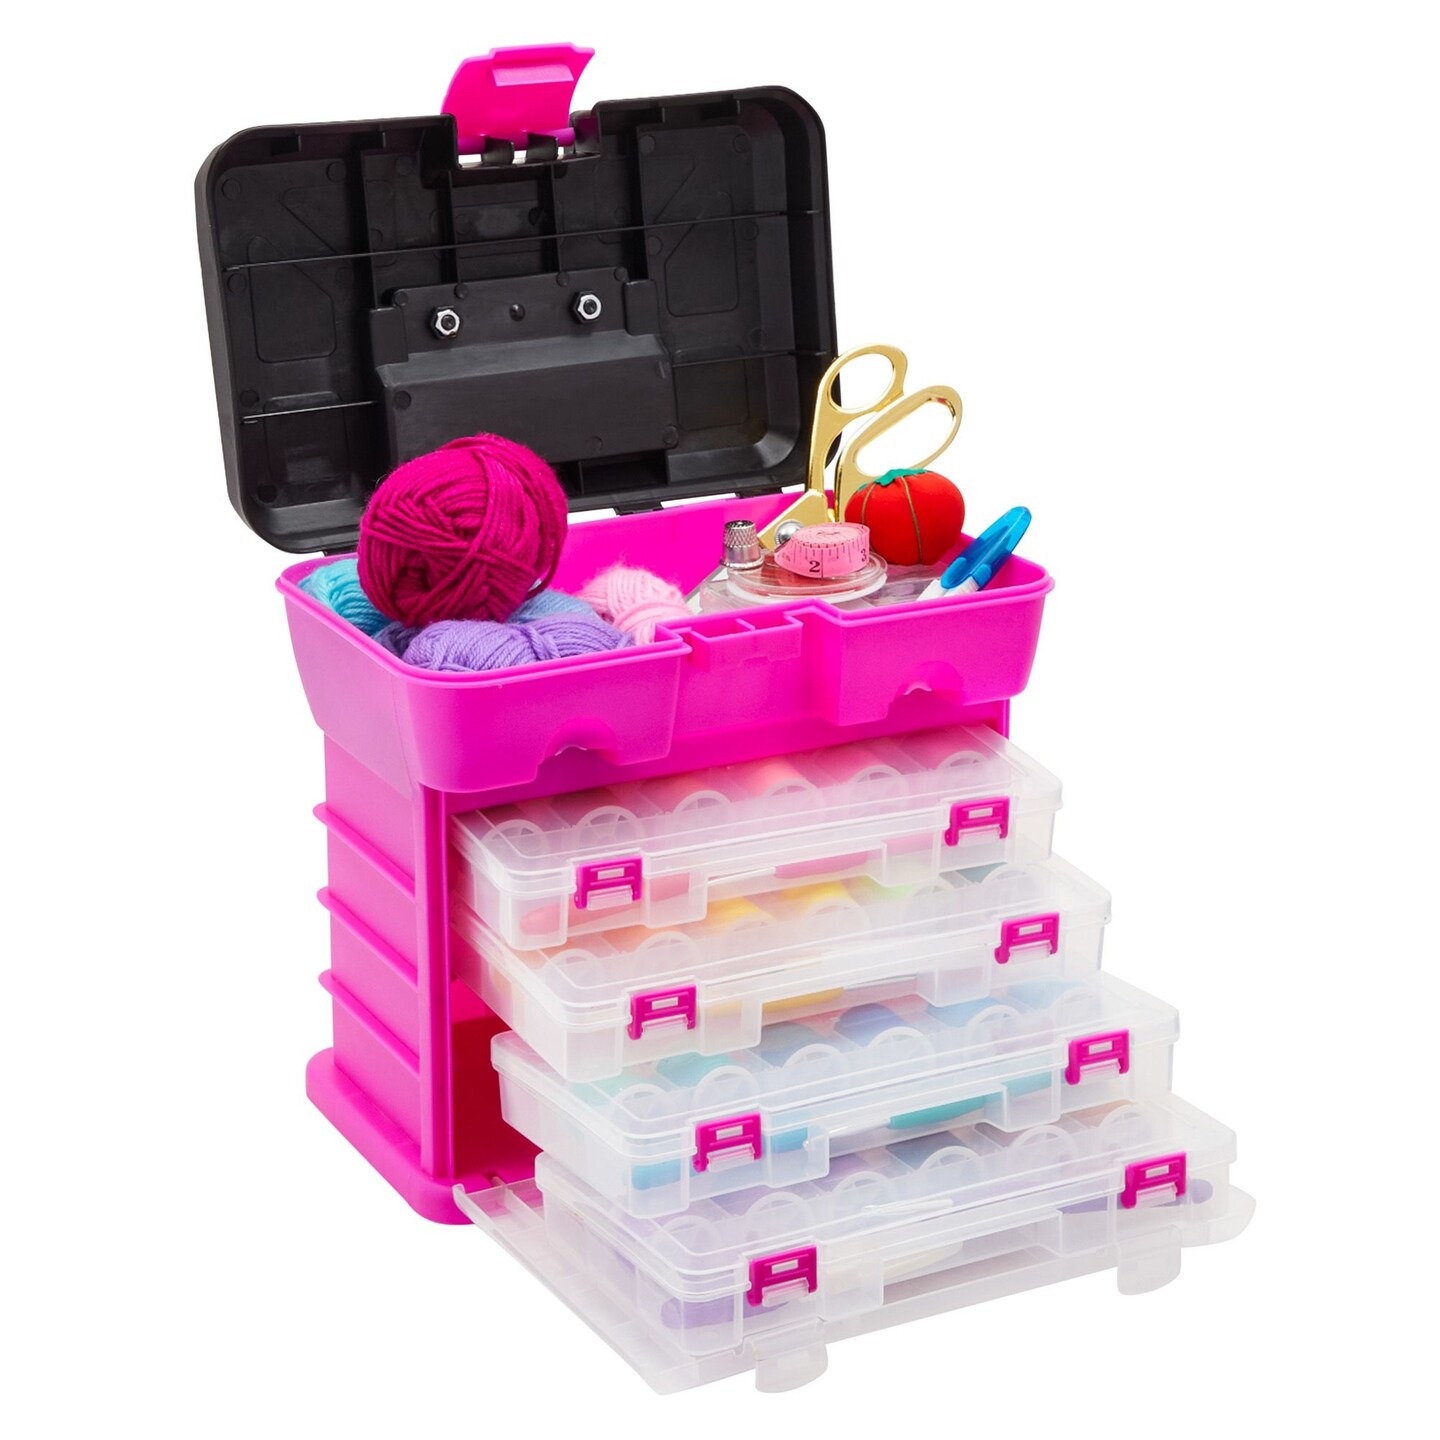 Tackle Boxes - Storage - Tools & More